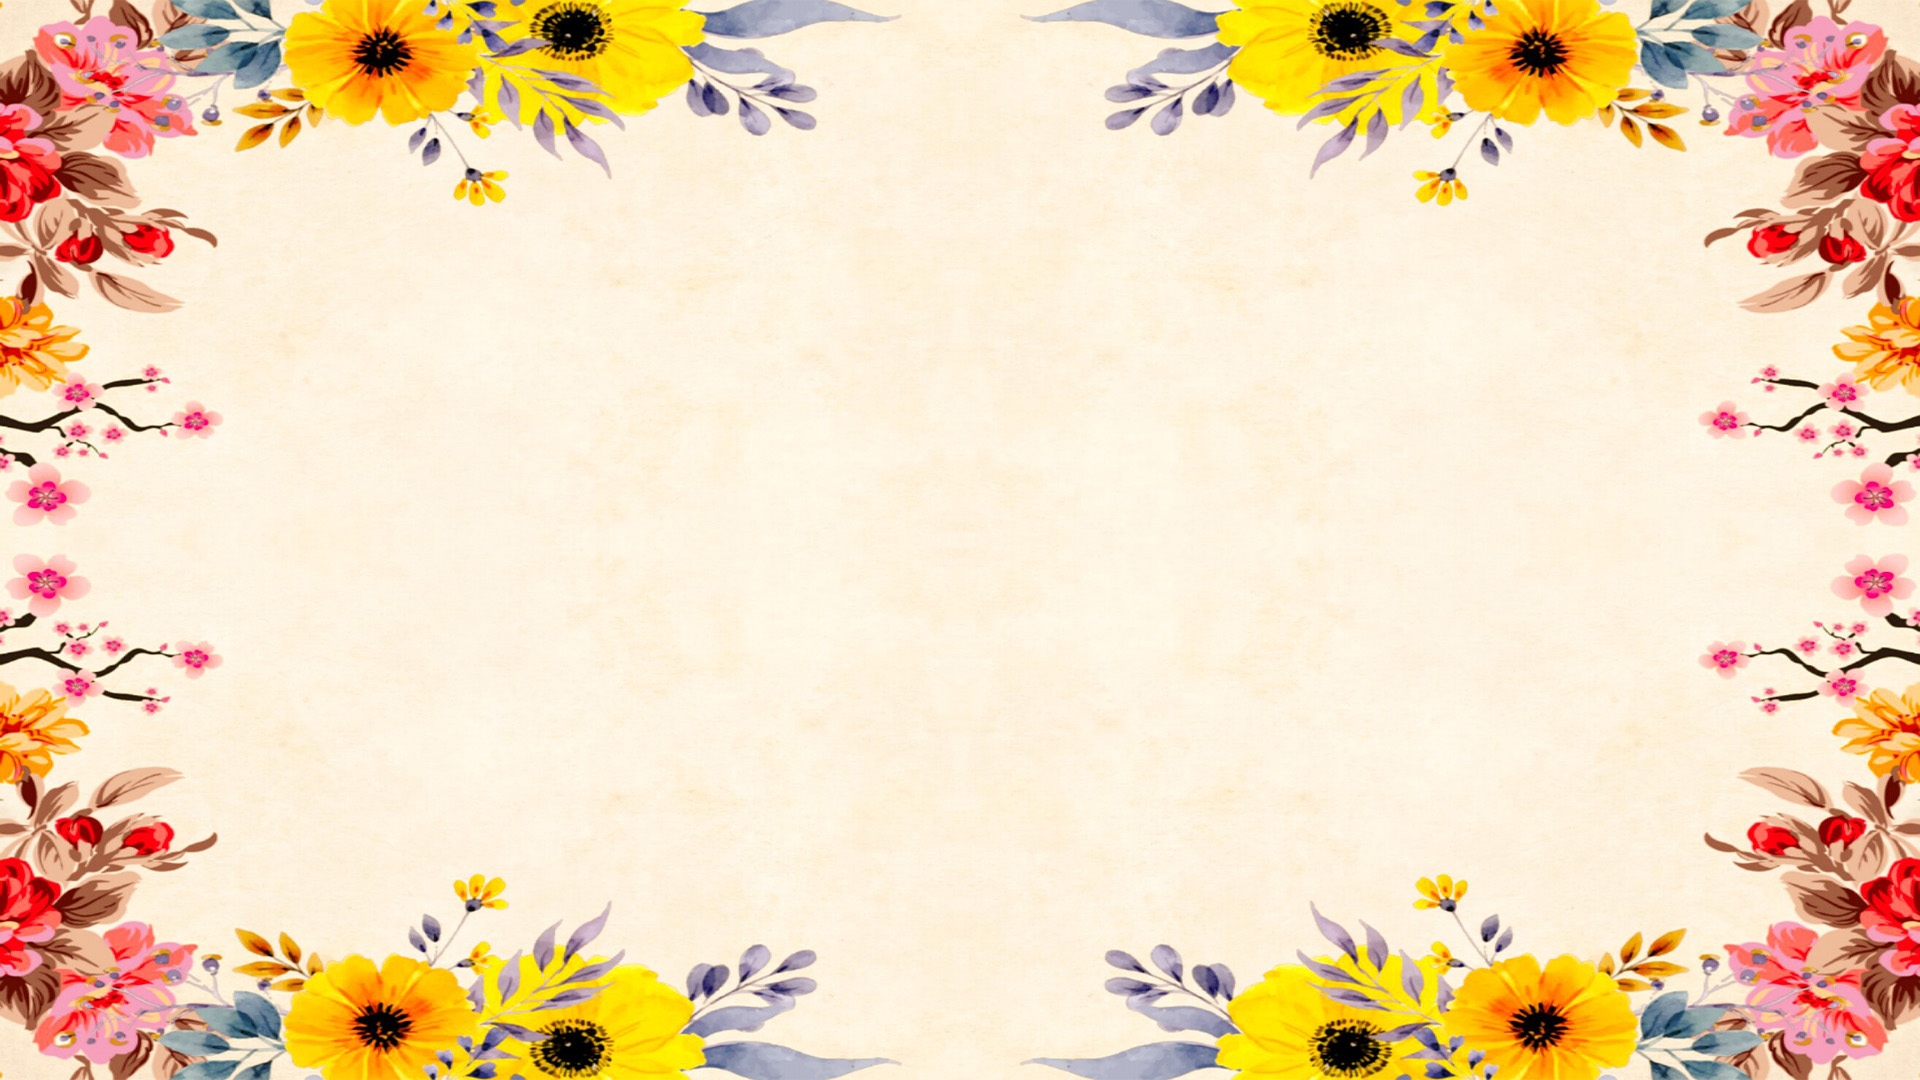 Light tan, beige paper background. Pink, brown, blue, yellow, orange, purple, and red florals of various flower species frame the edges.